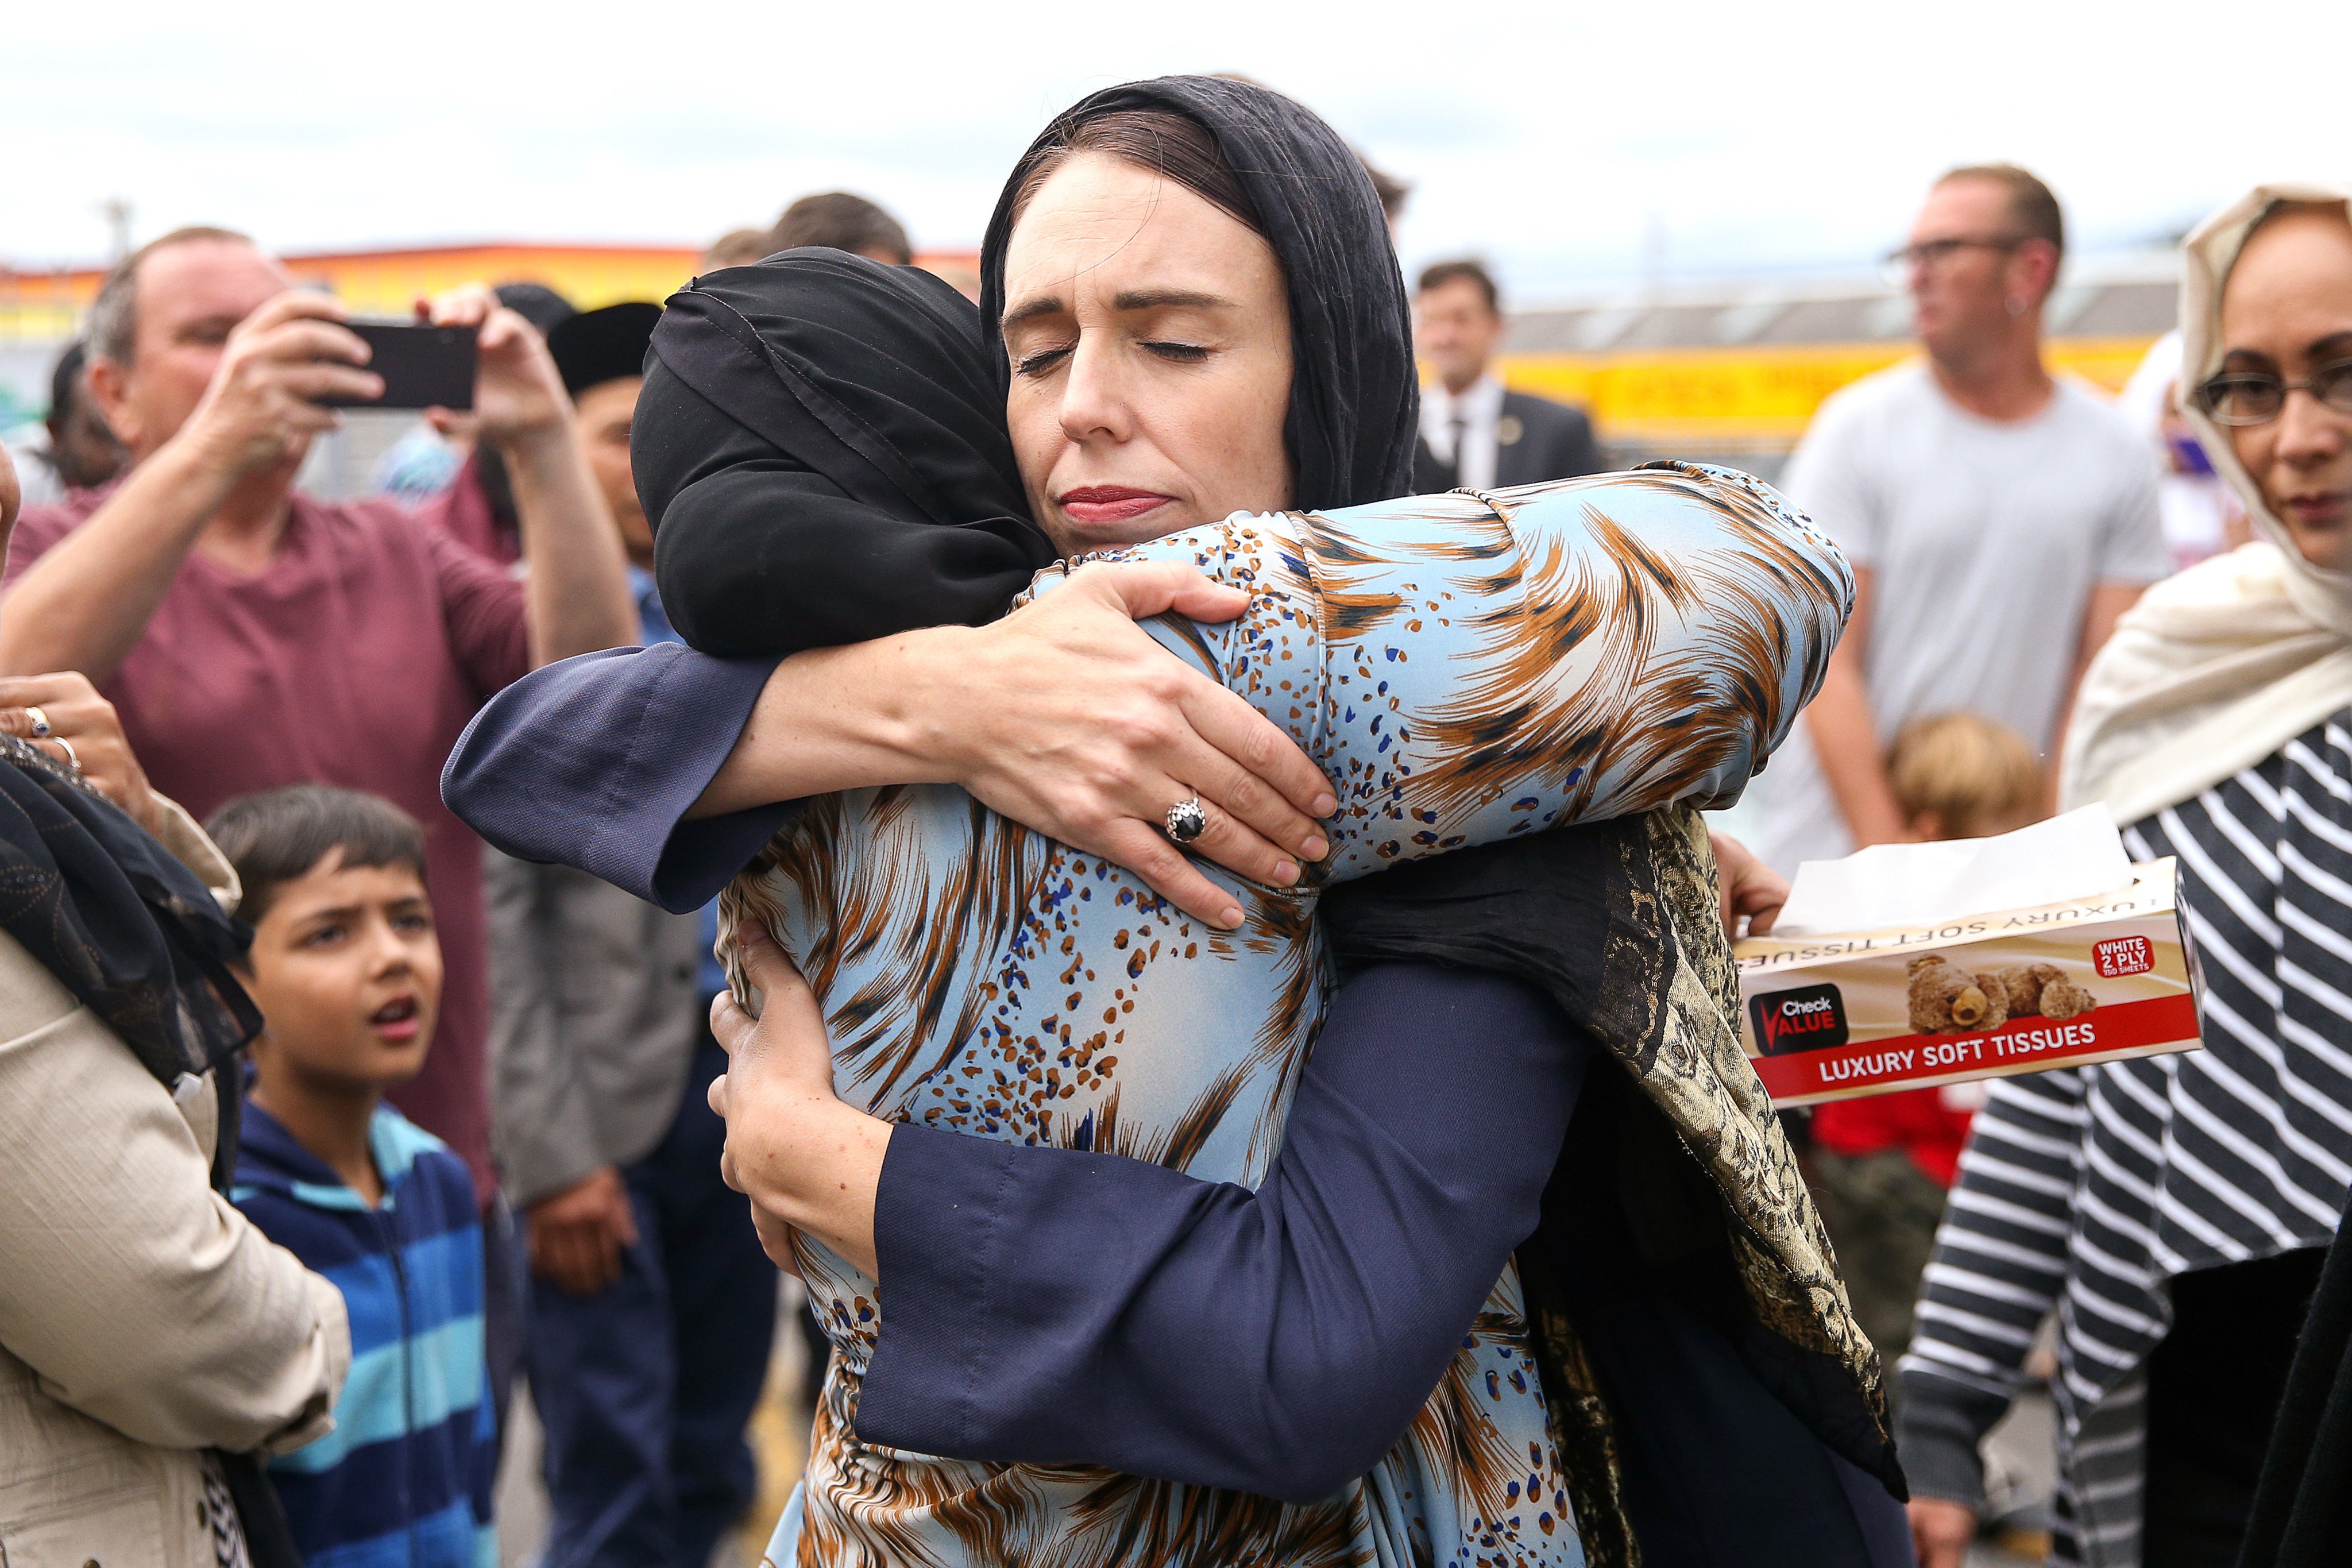 Prime Minister Jacinda Ardern, wearing a hijab, comforts a woman in the days after 2019’s Christchurch mosque shootings. Photo: Getty Images